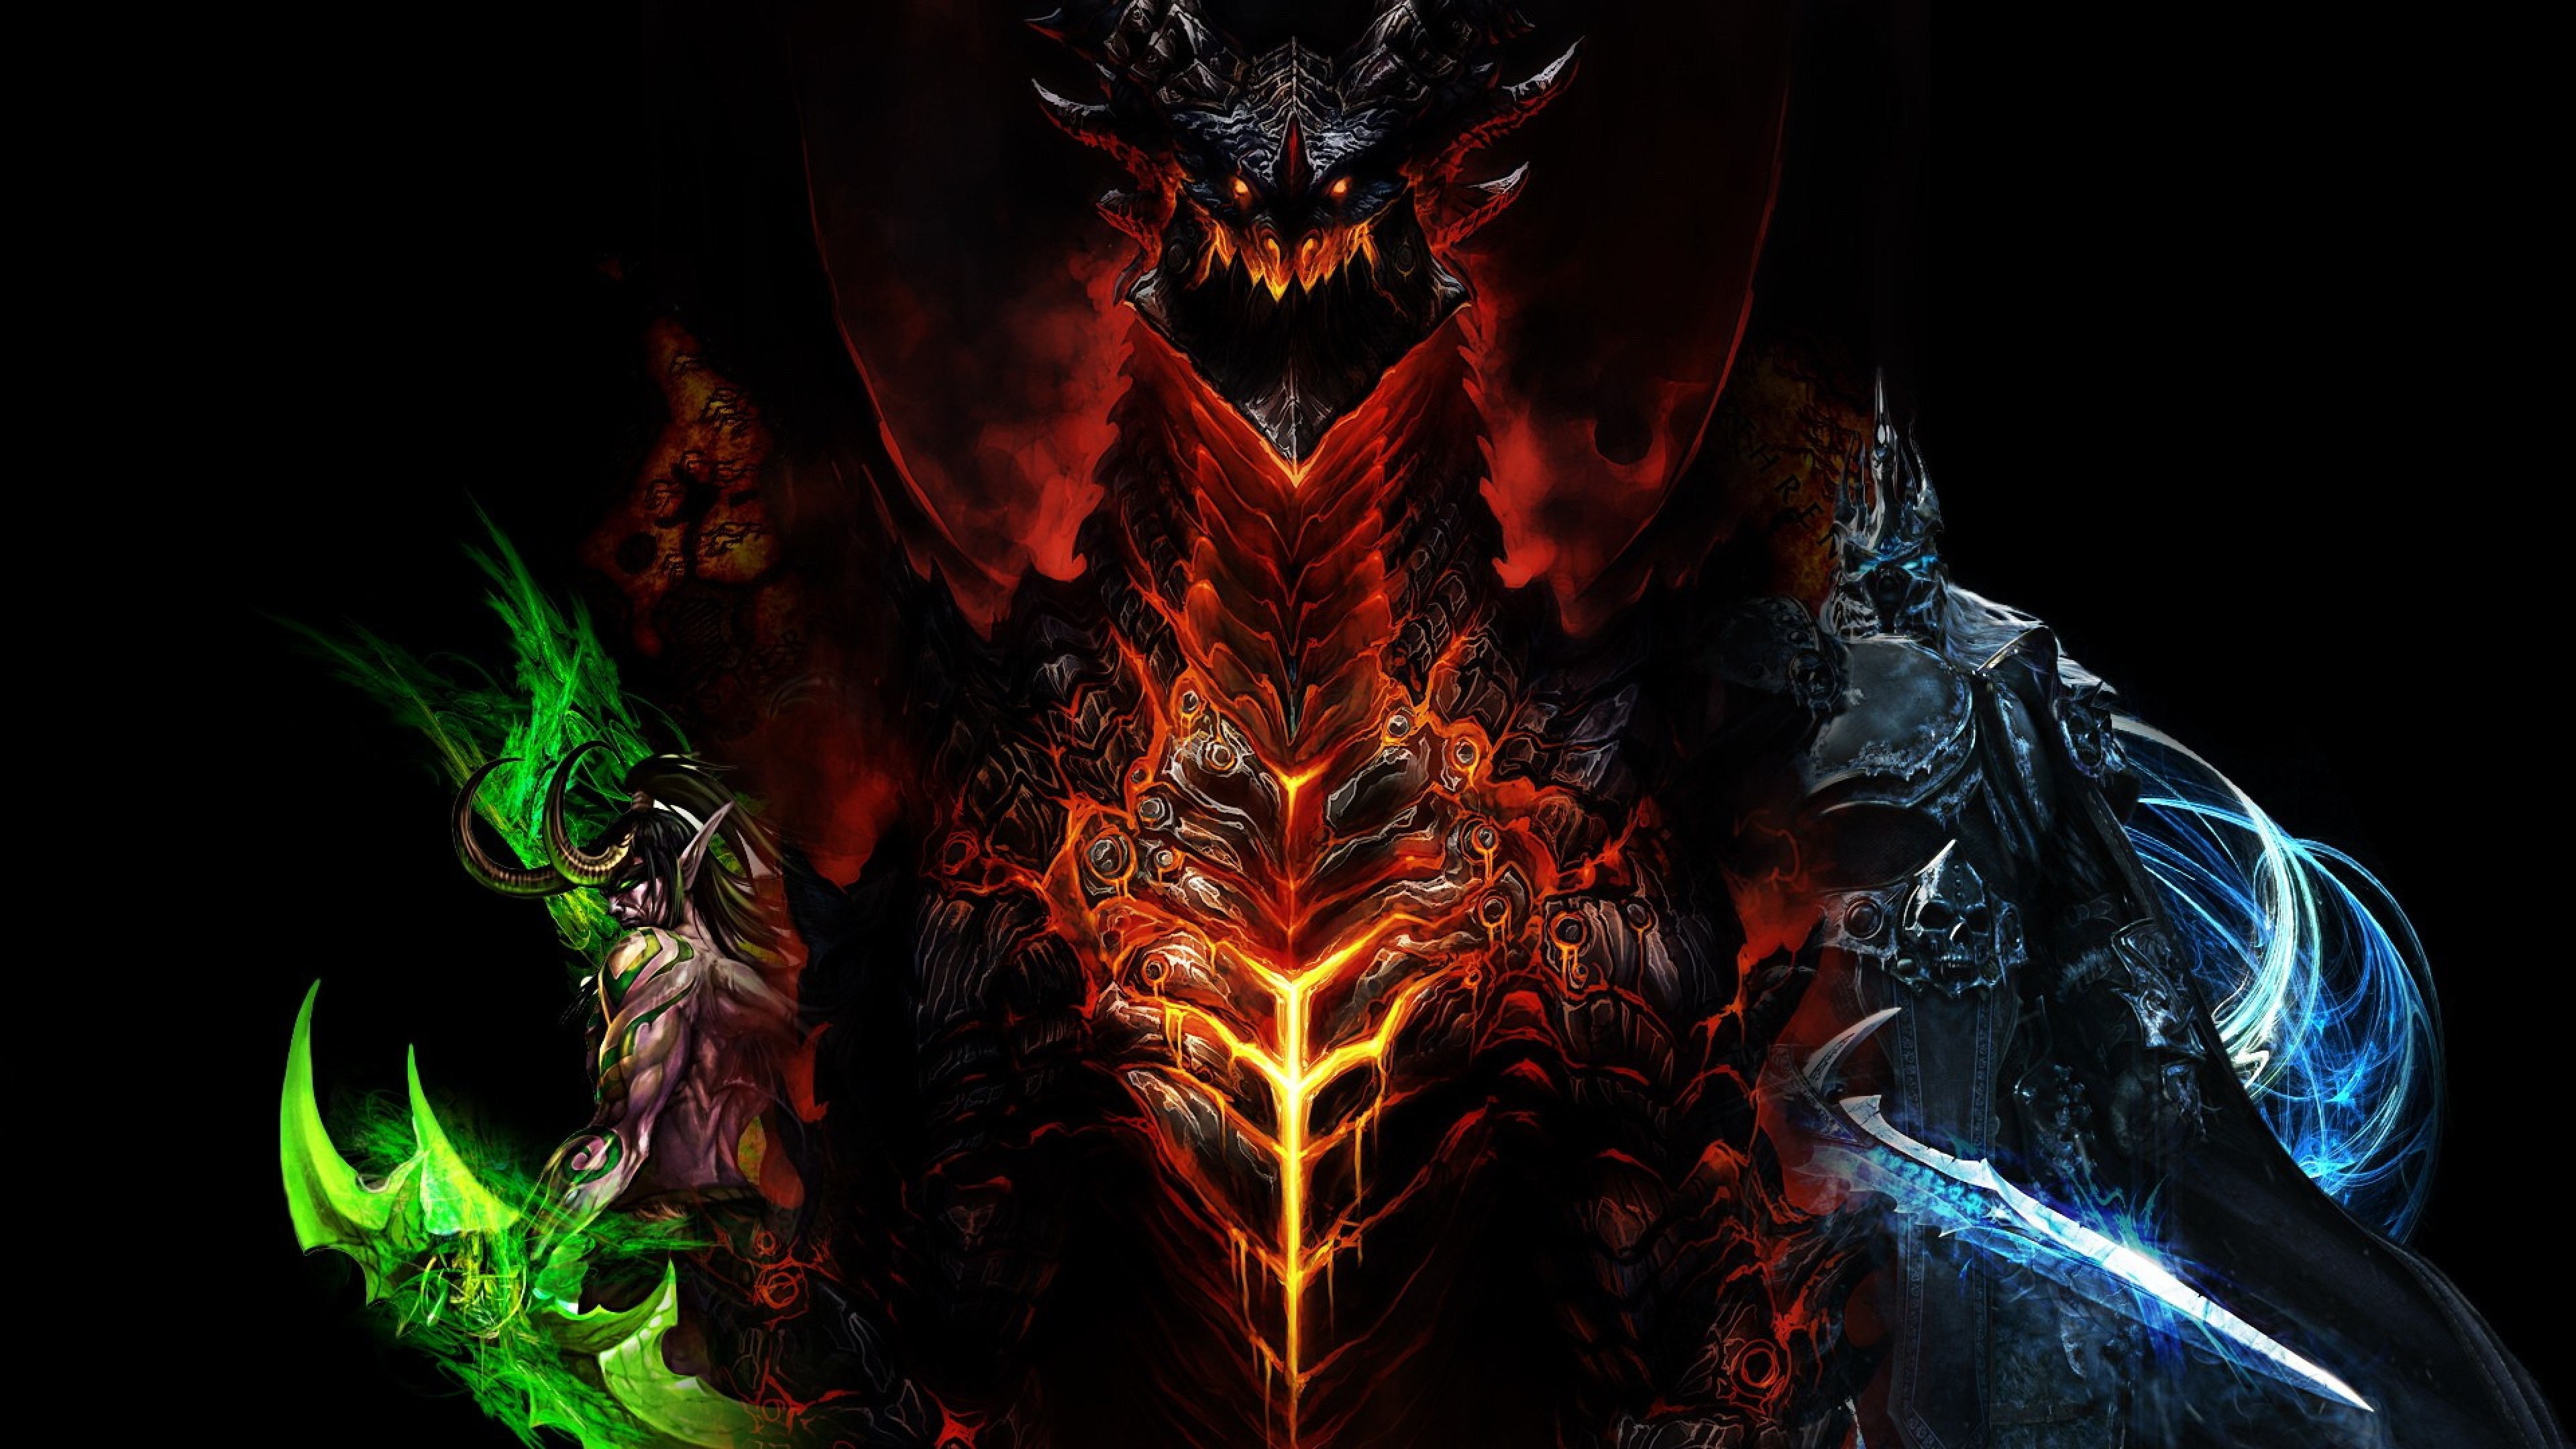  World of warcraft Dragon Characters Faces Wallpaper Background 4K 3840x2160